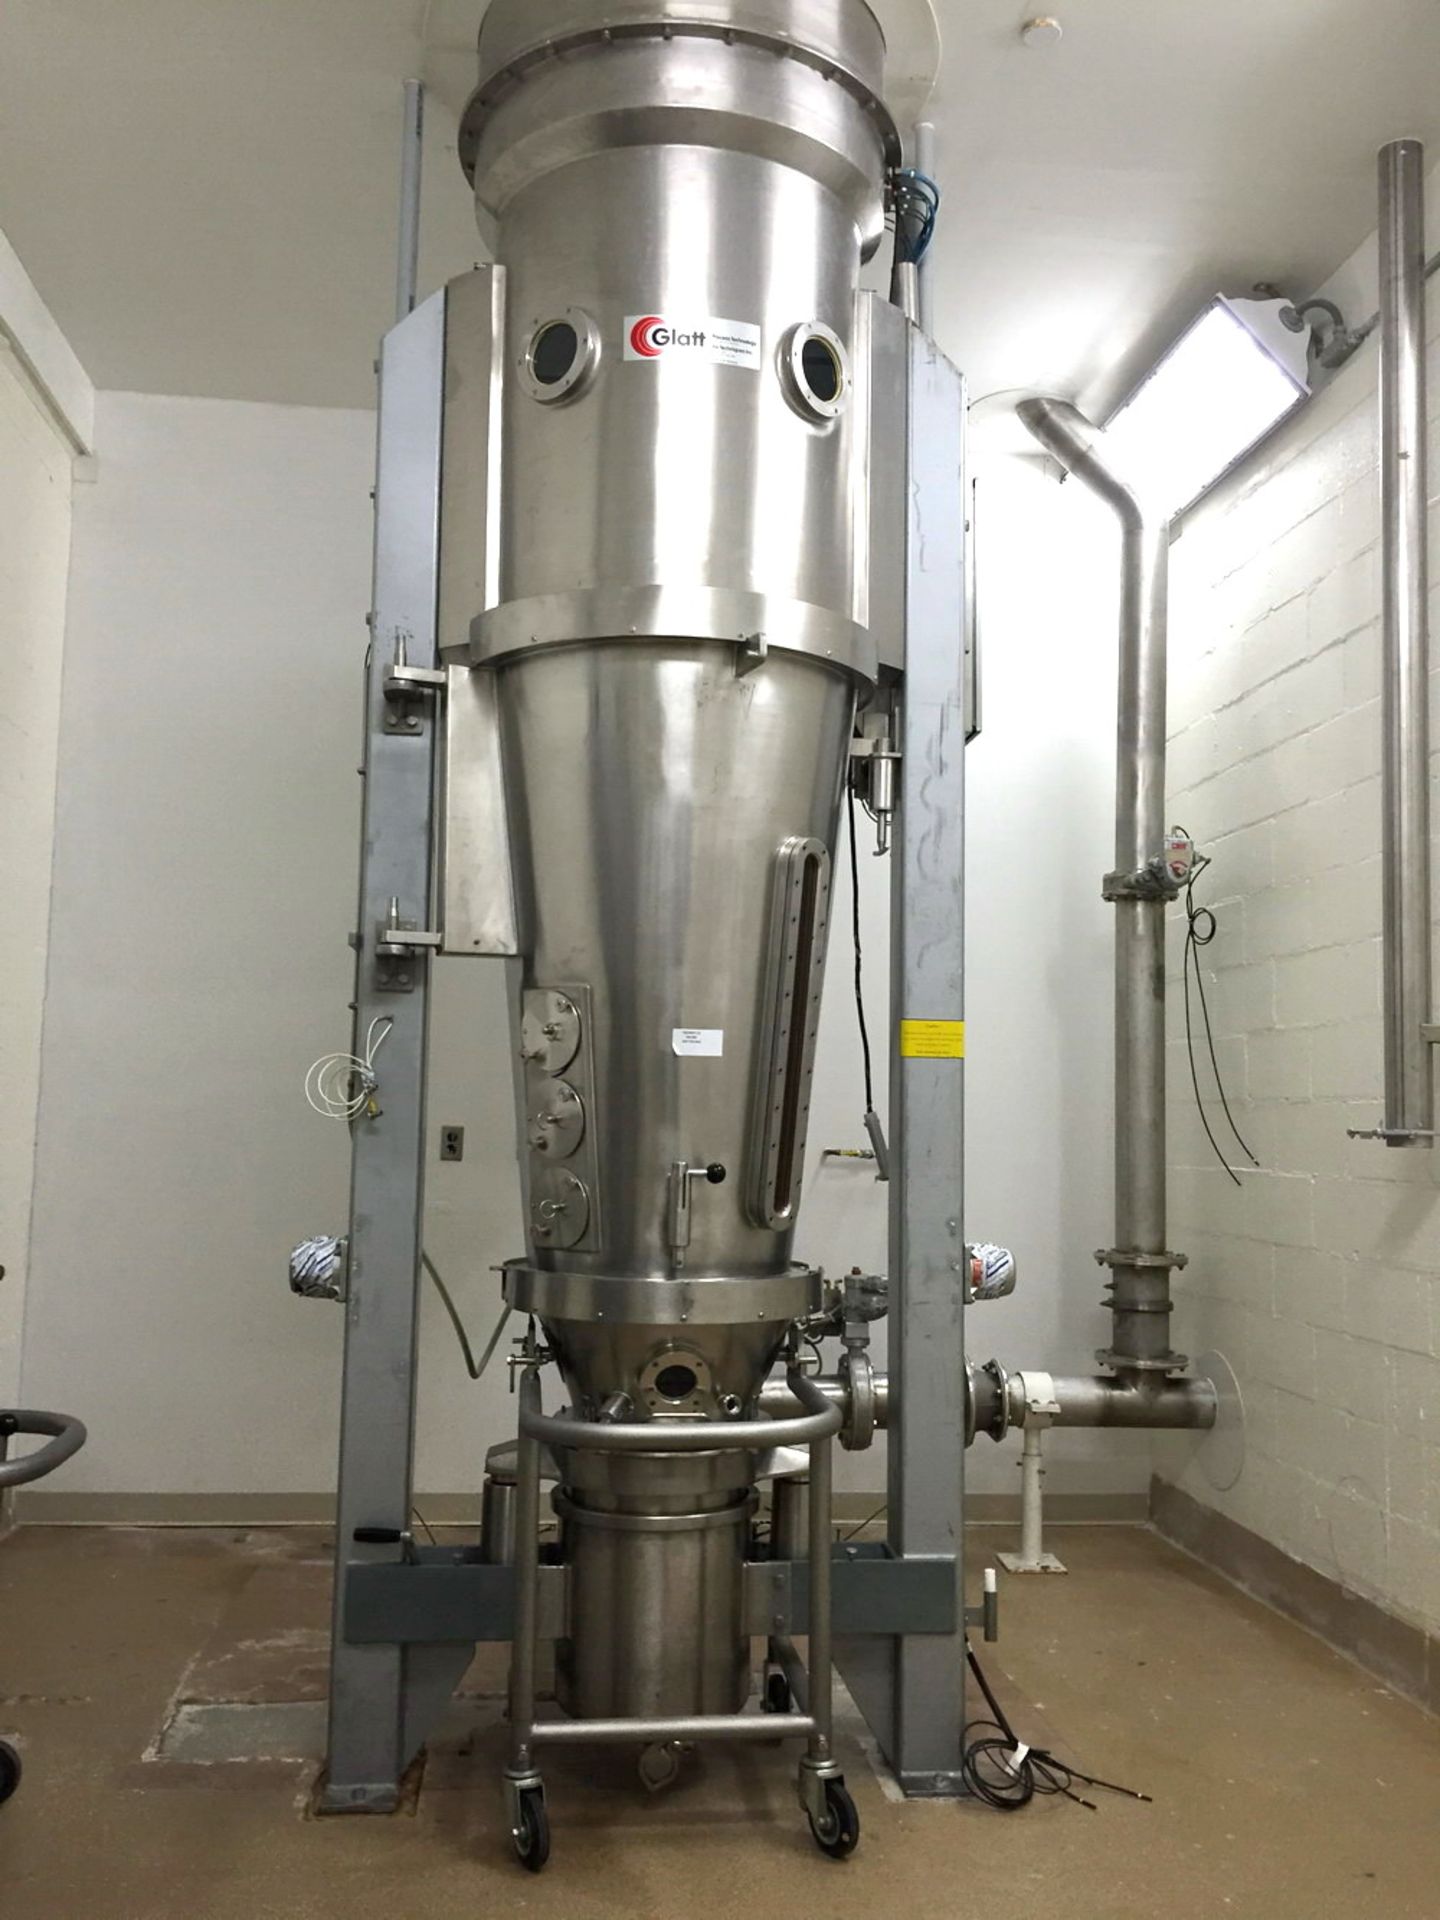 Glatt Fluid Bed Granulator with 9" Wurster, 22L and 45L Drying Inserts, Model GPCG-15, SN 5313. - Image 10 of 25